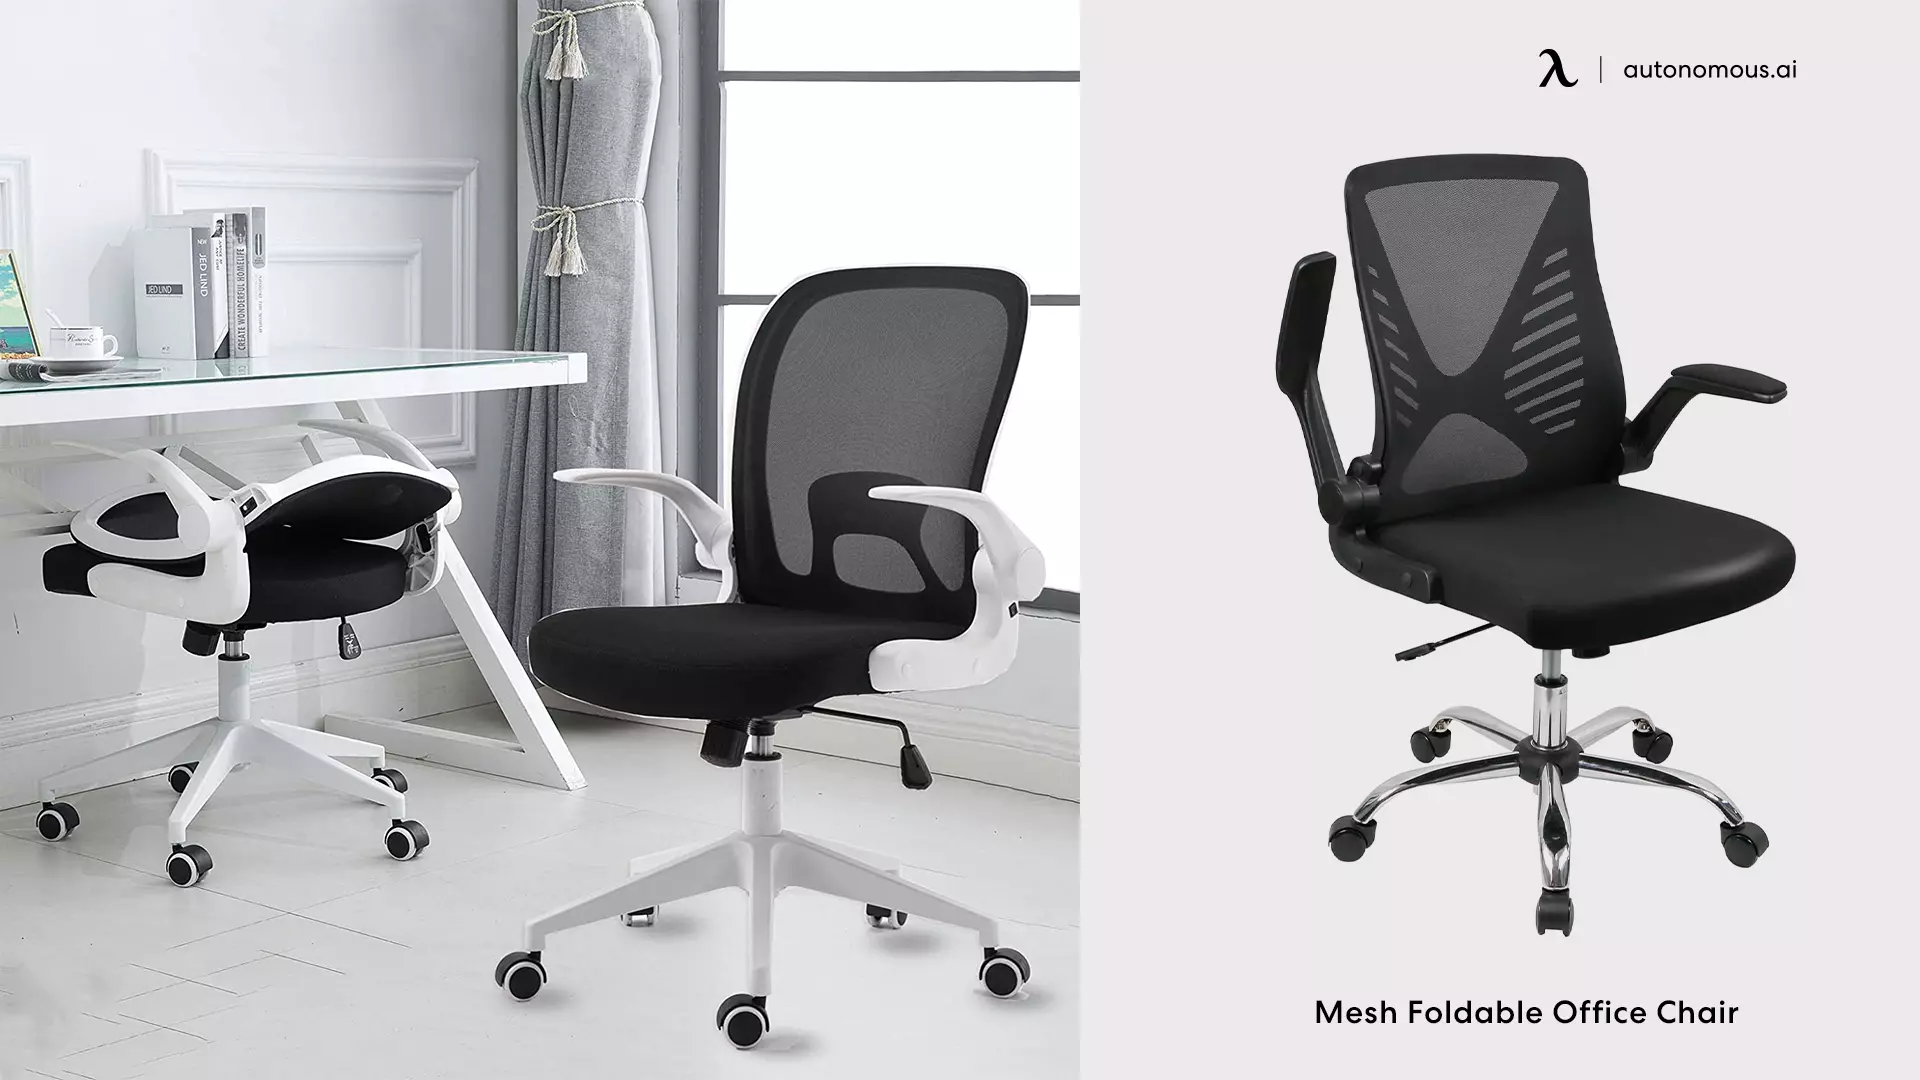 Mesh foldable back office chair